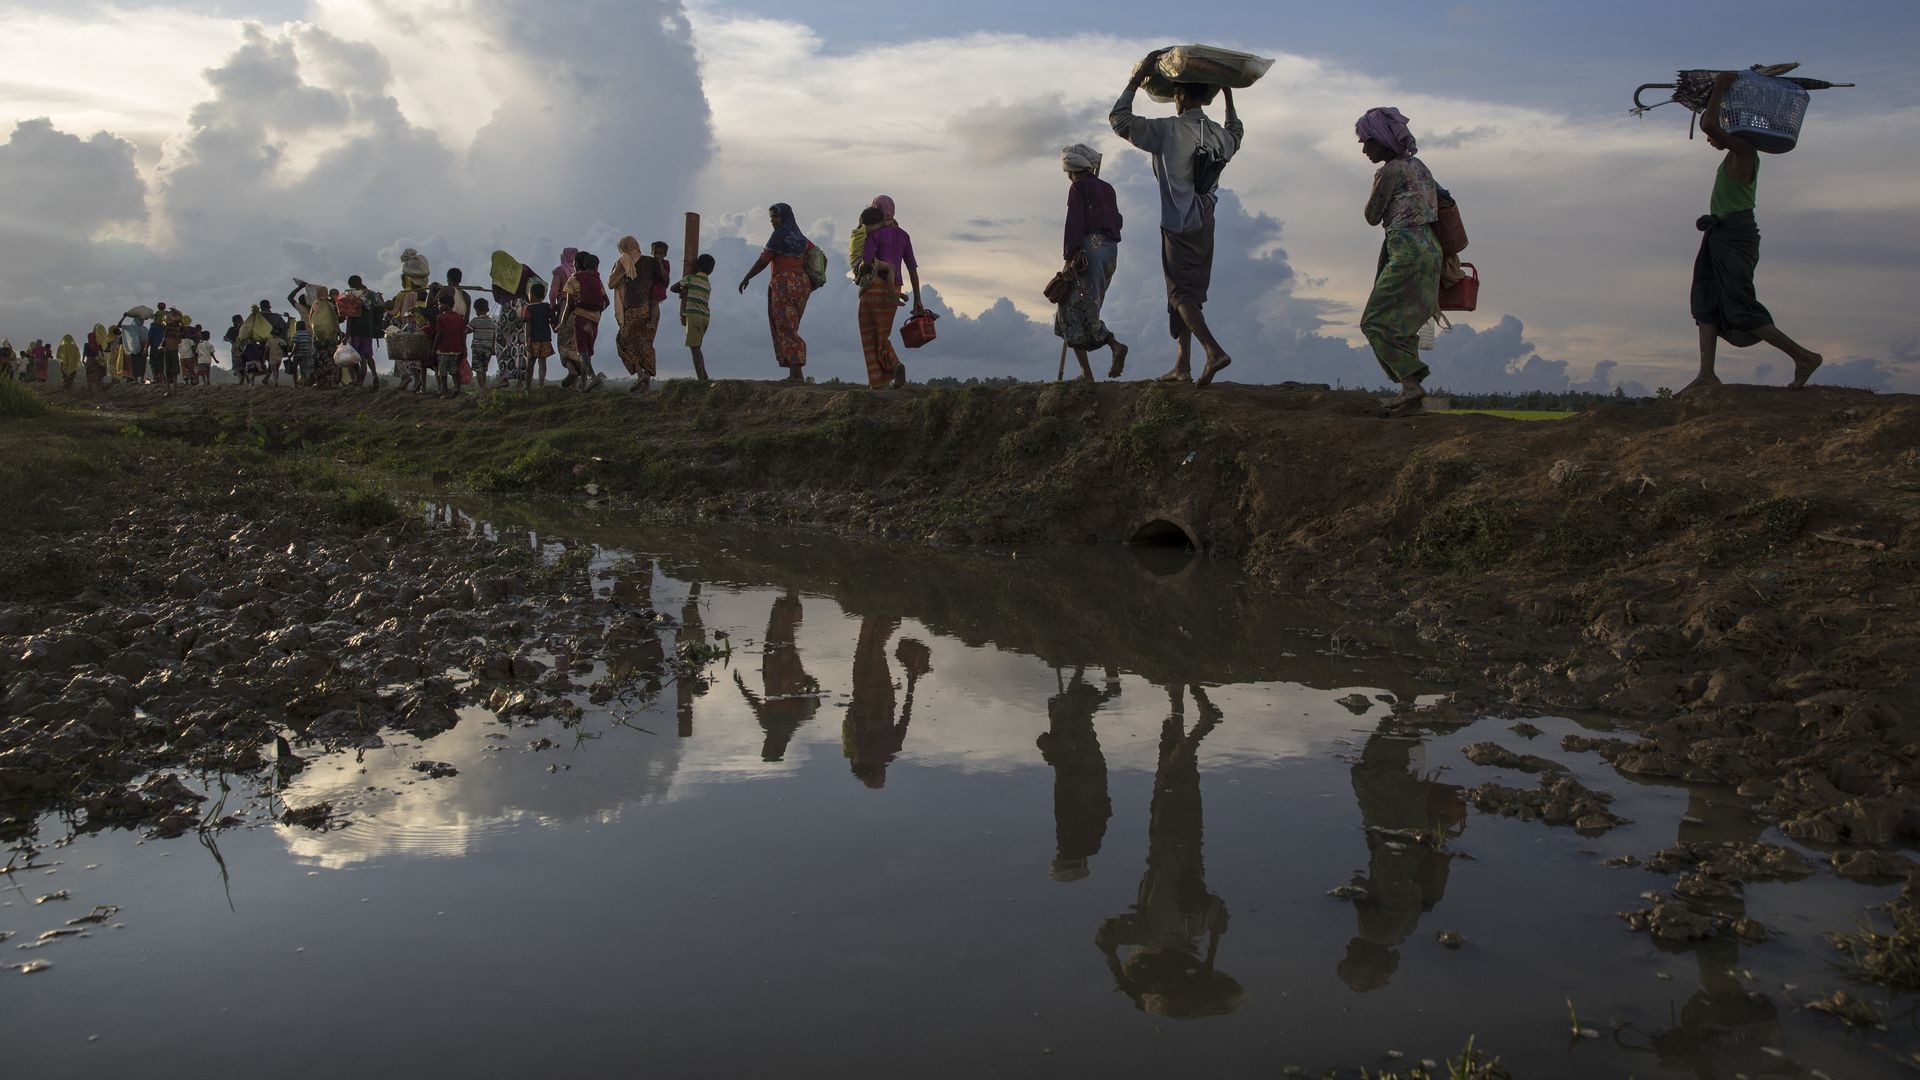 Thousands of Rohingya refugees fleeing from Myanmar walk along a muddy rice field after crossing the border in Palang Khali, Cox's Bazar, Bangladesh in 2017.